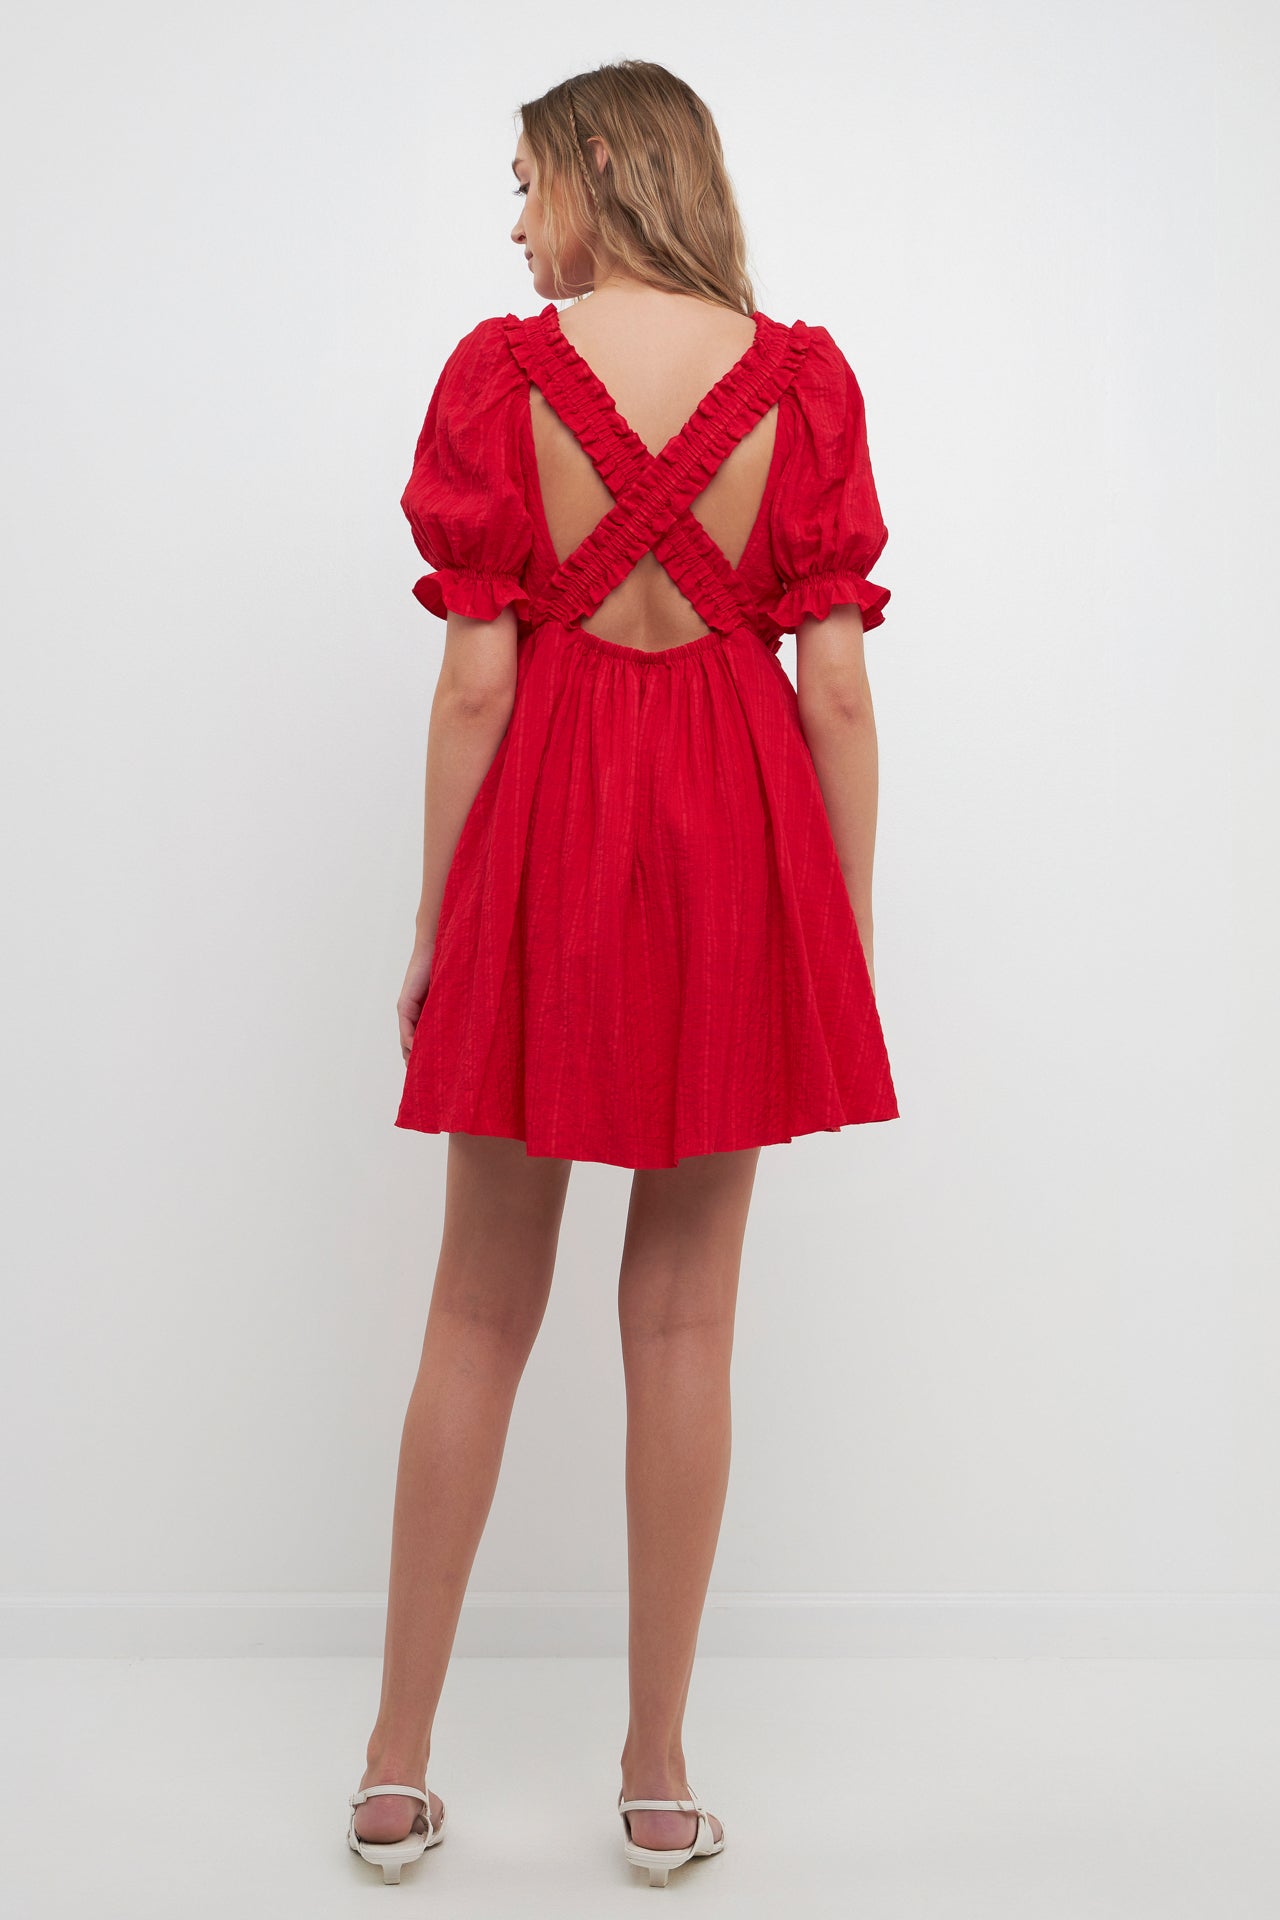 FREE THE ROSES - Double Ruffled Band Mini Puff Sleeve Dress - DRESSES available at Objectrare